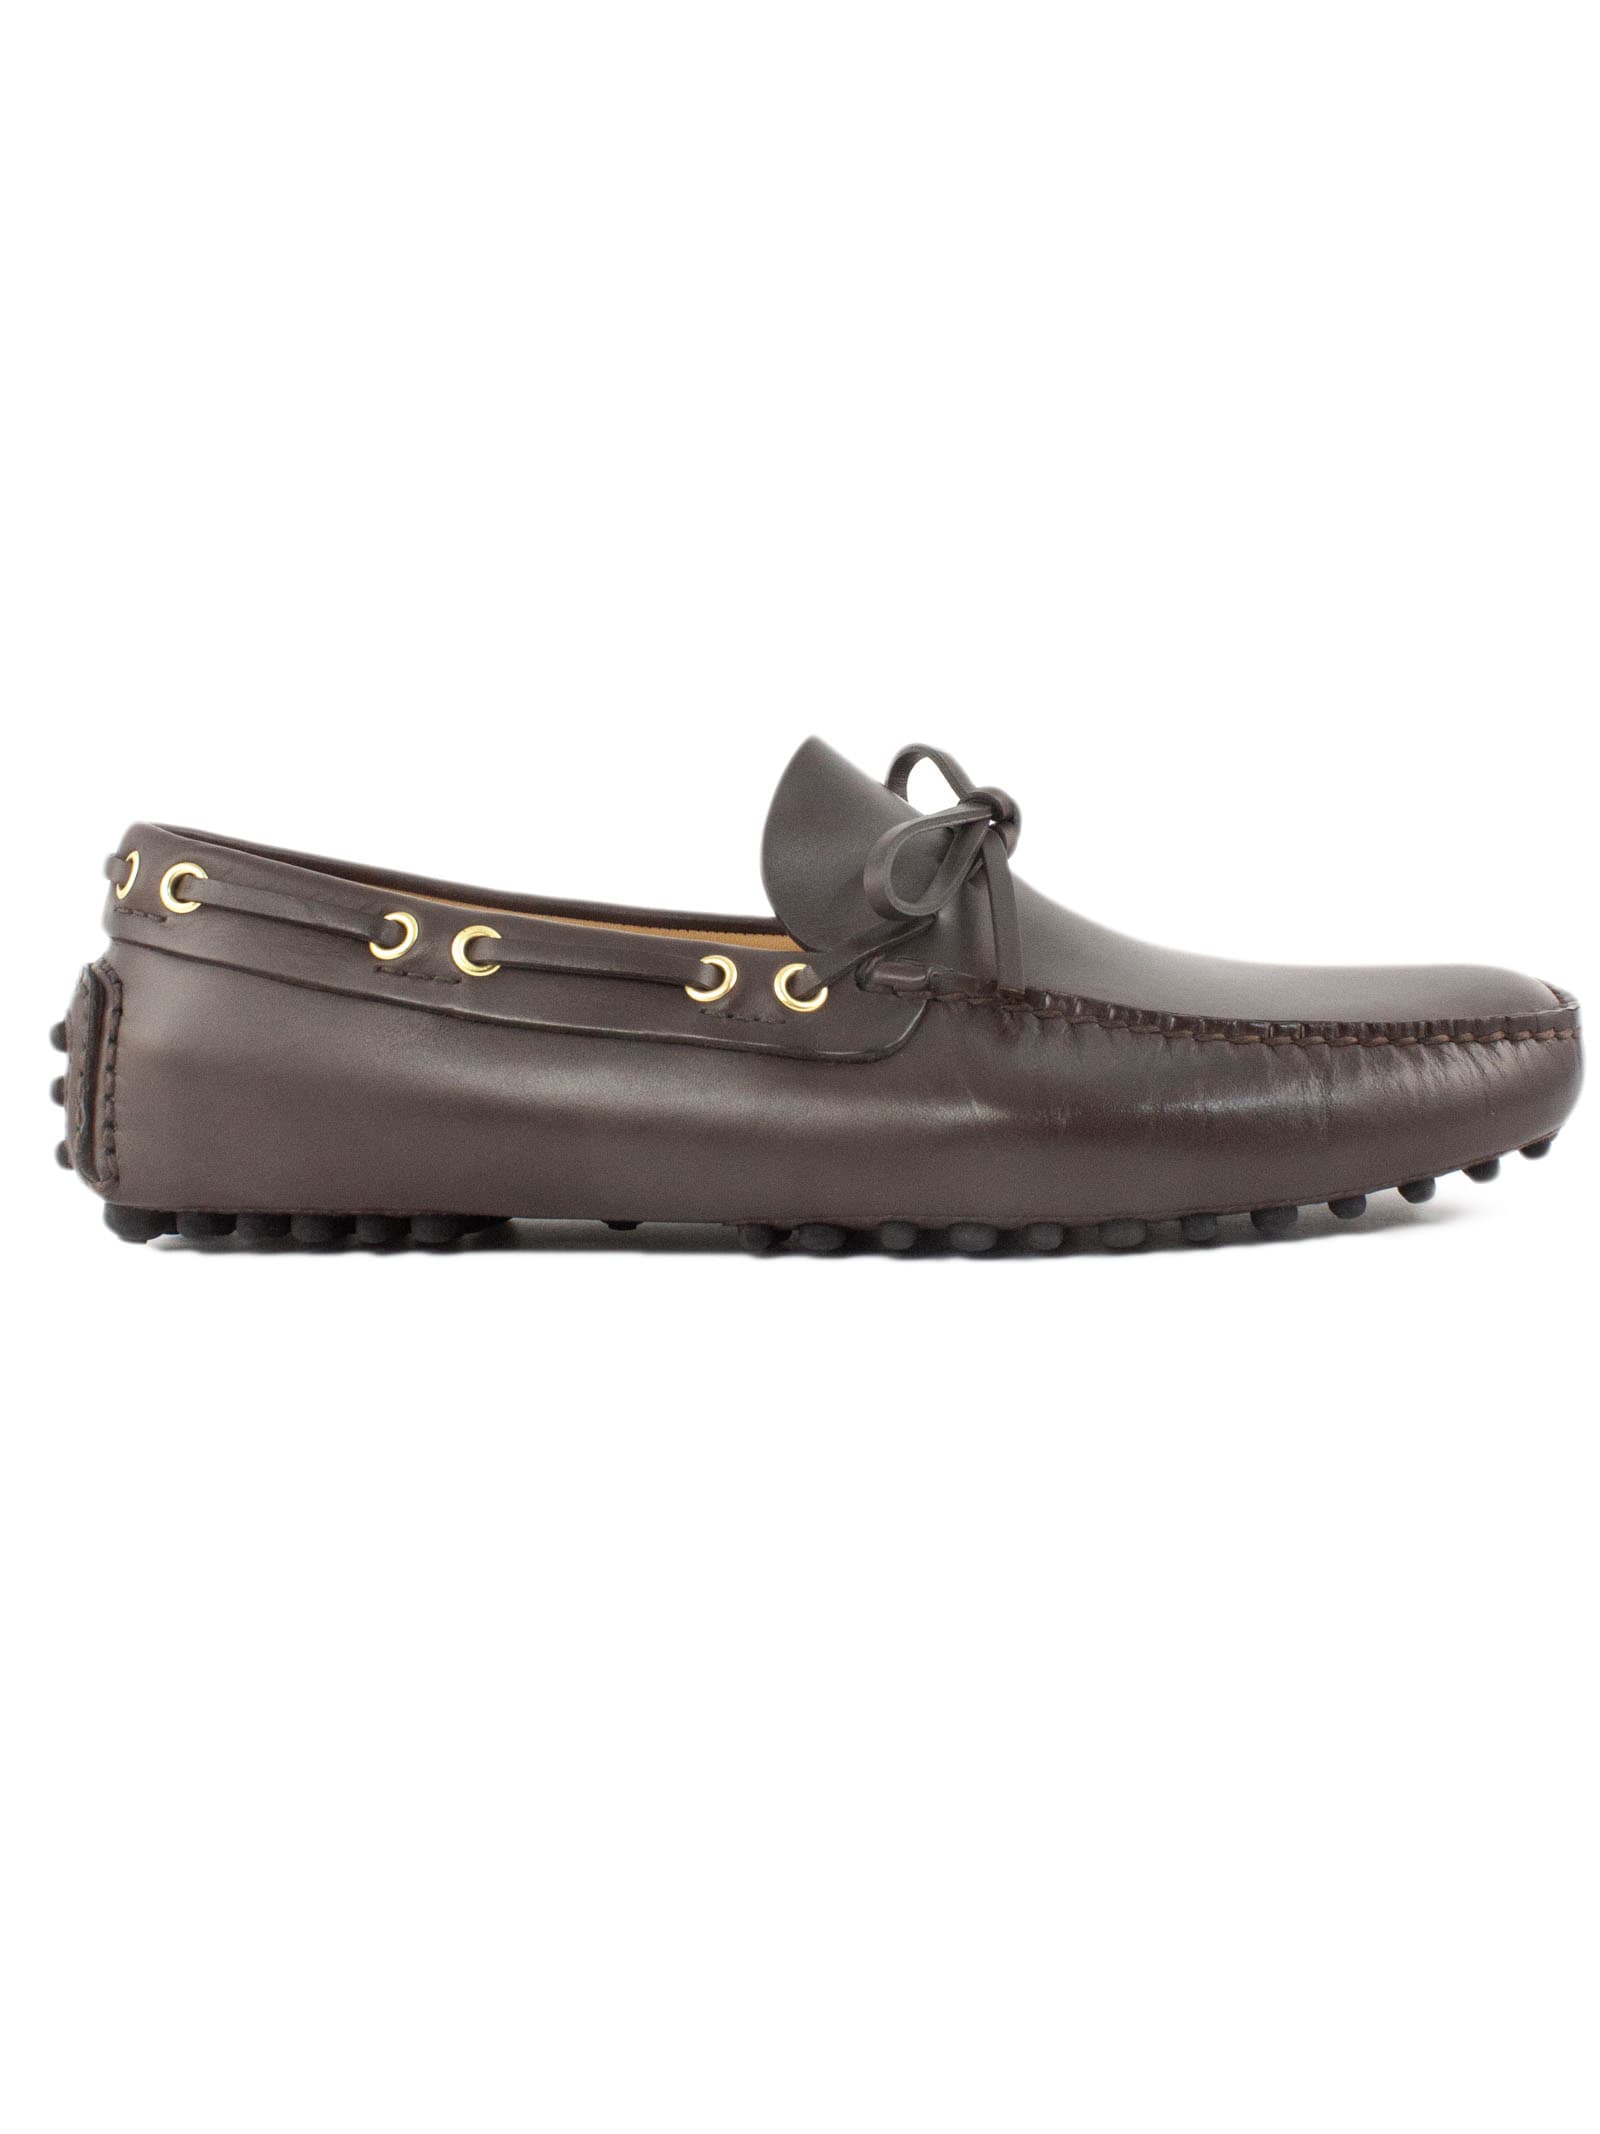 Car Shoe Driver Loafer In Brown Leather